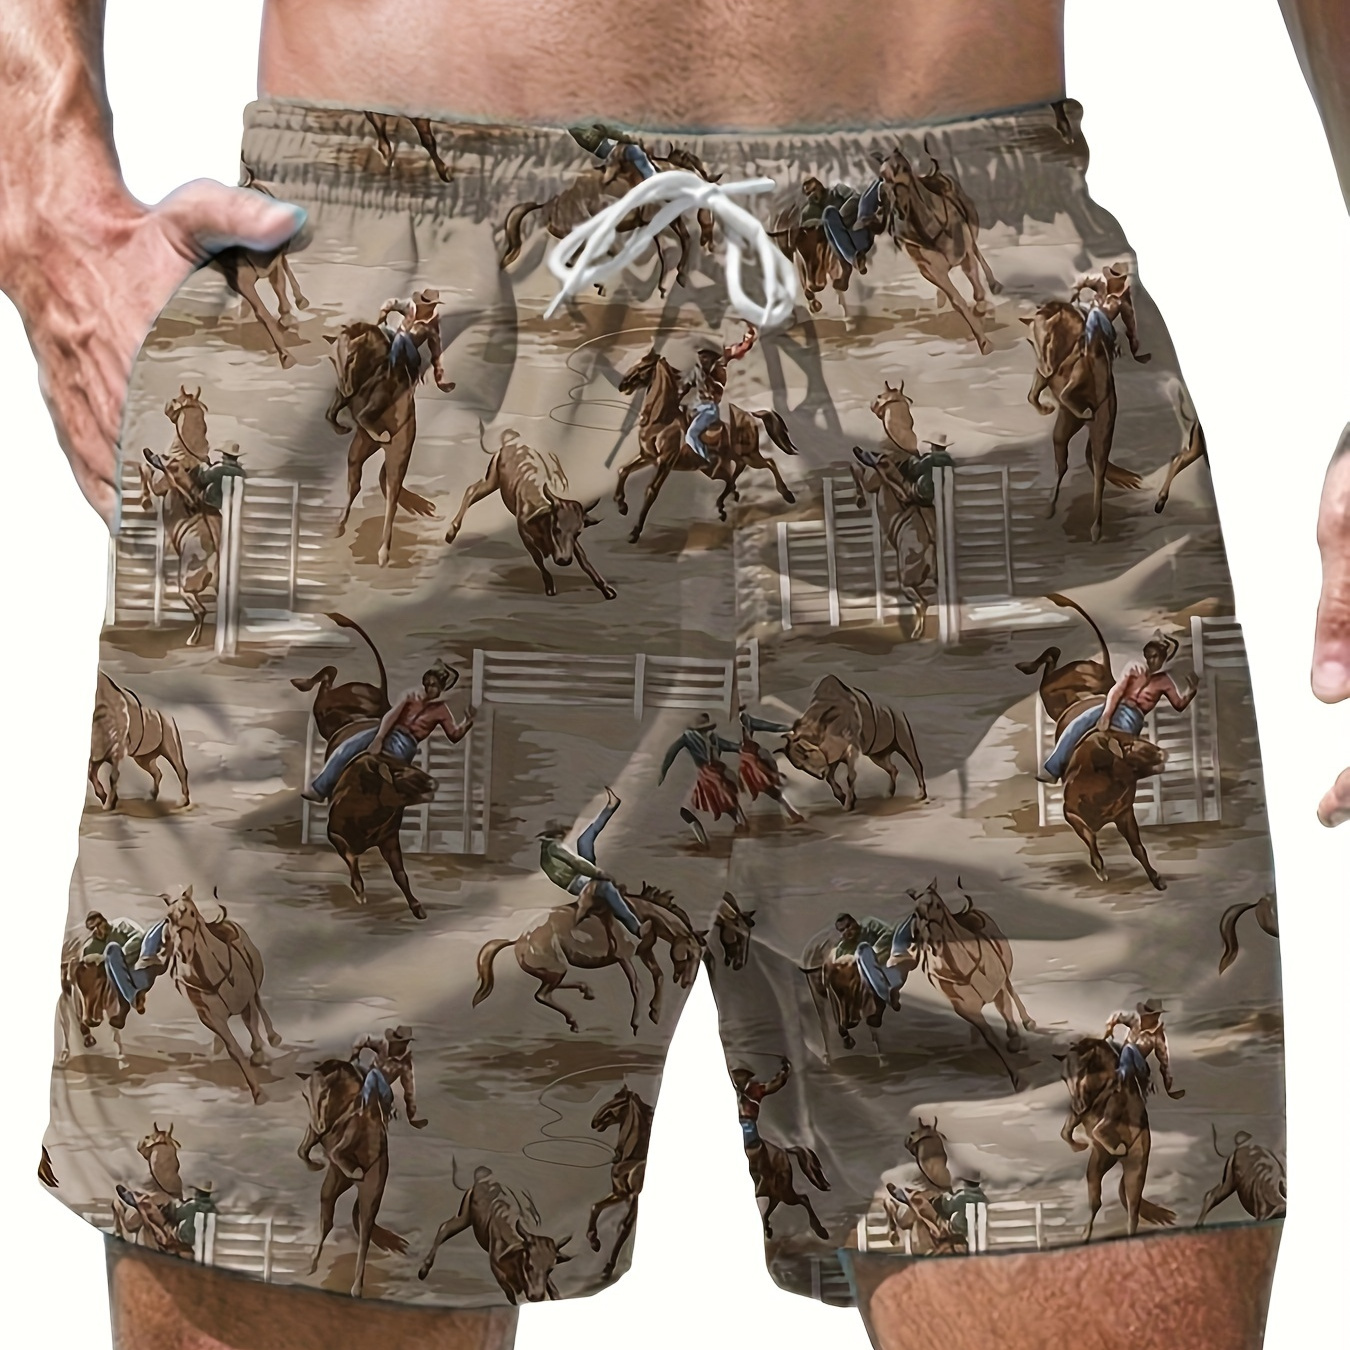 

Western Cowboys Pattern Men's Stylish Drawstring Shorts With Pockets For Summer Beach Sports